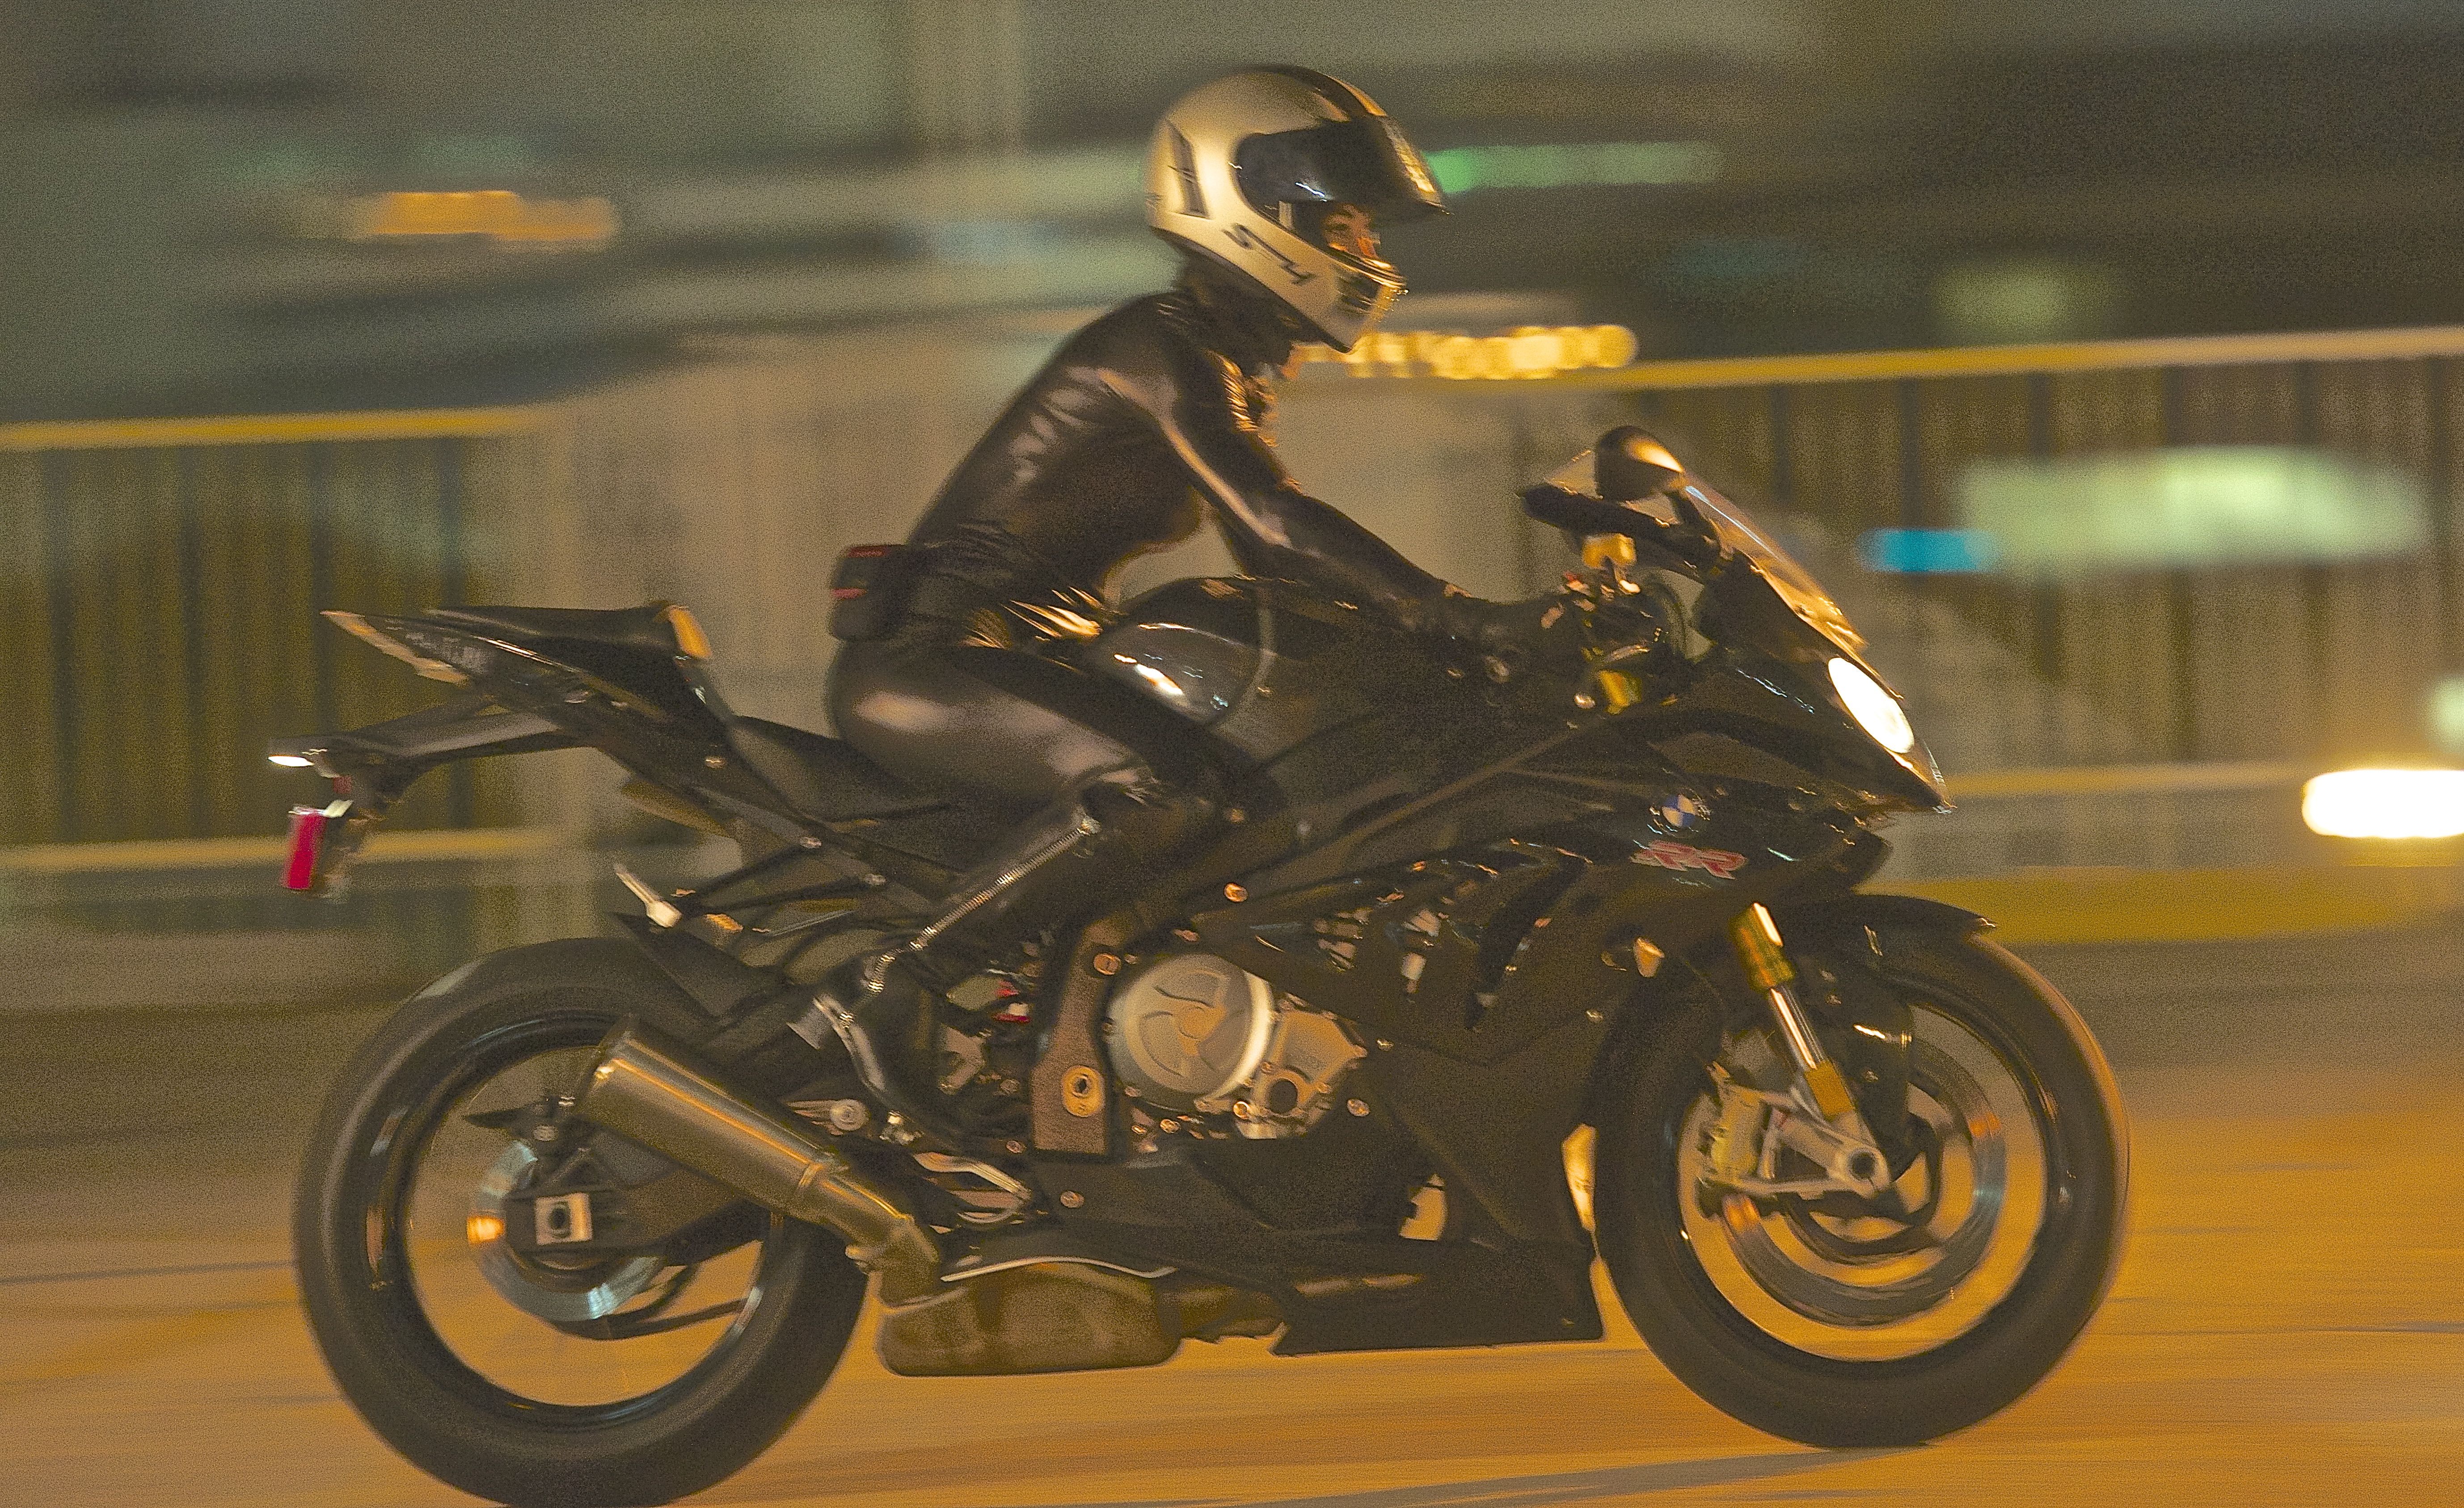 Alison Bacon riding a BMW 1000RR in a commercial directed by Alex Perry